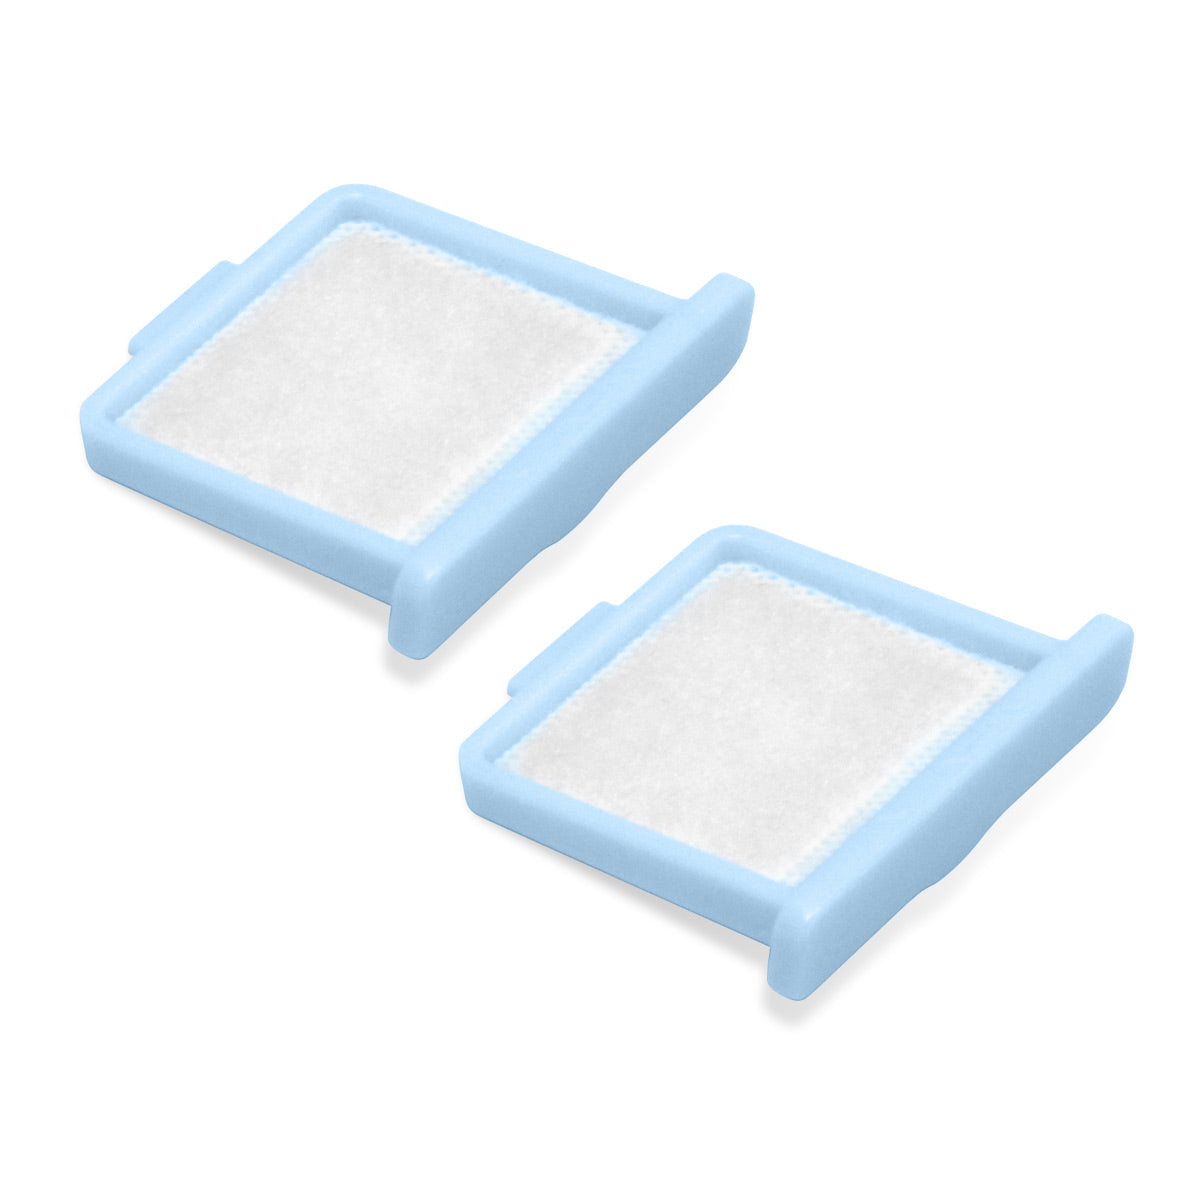 Reusable Foam Filter for DreamStation GO Portable Series CPAP Machines (2 Pack)